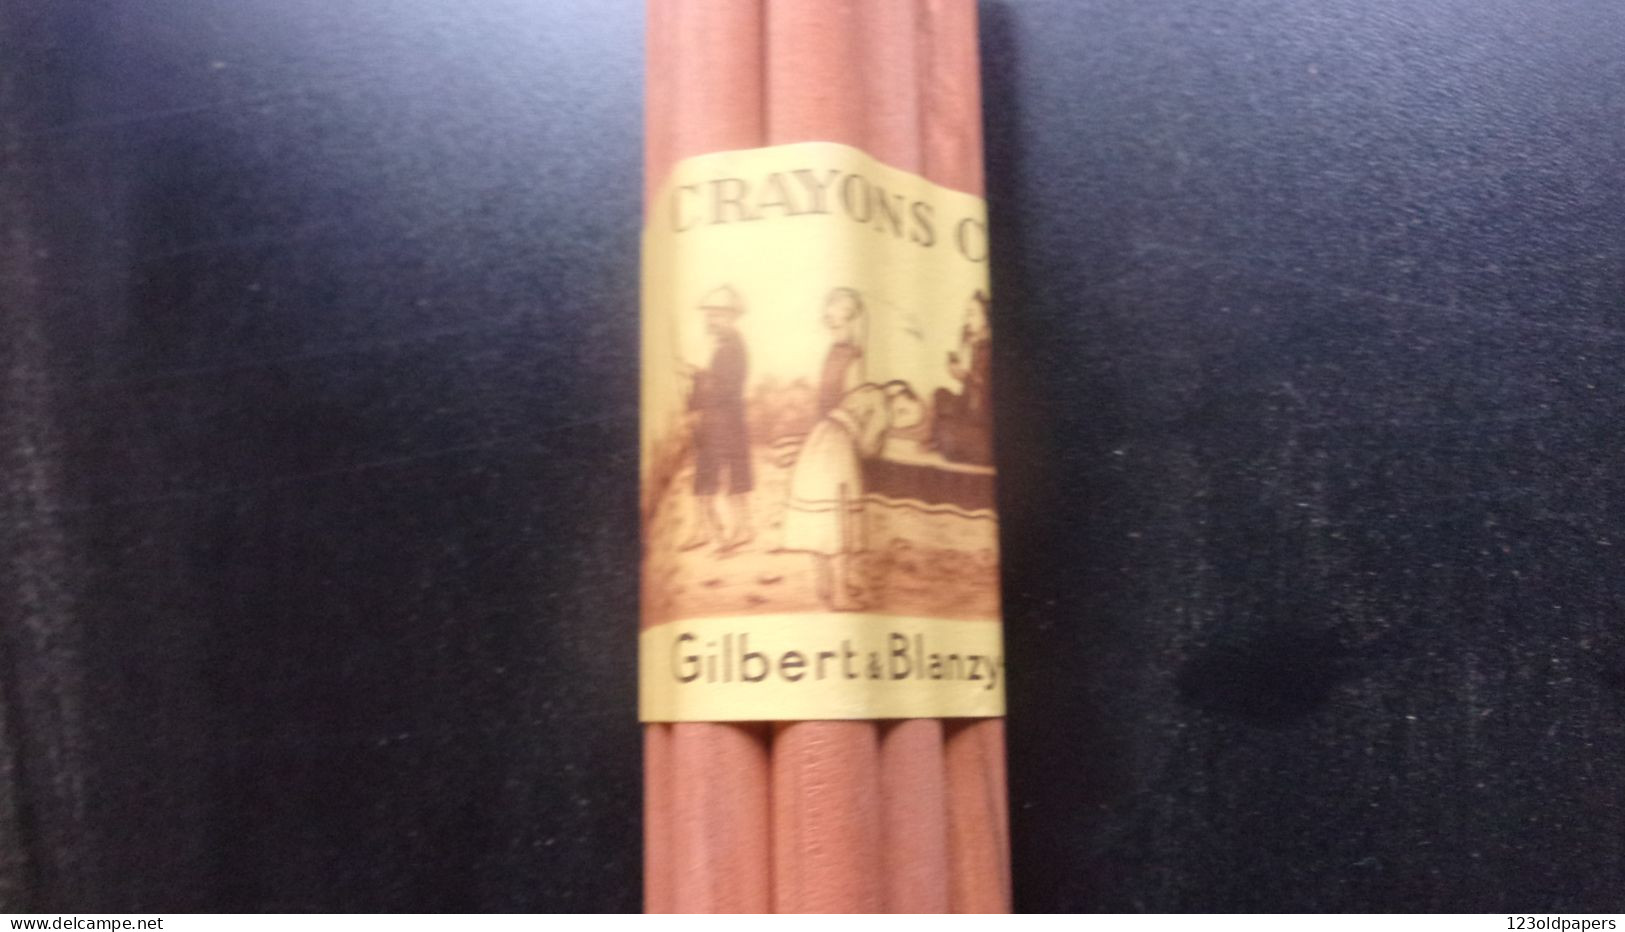 ️ RARE COMME NEUF   GILBERT BLANZY POURE CRAYONS CHINOIS ENSEMBLE NON OUVERT 12 CRAYONS N°2 - Penne